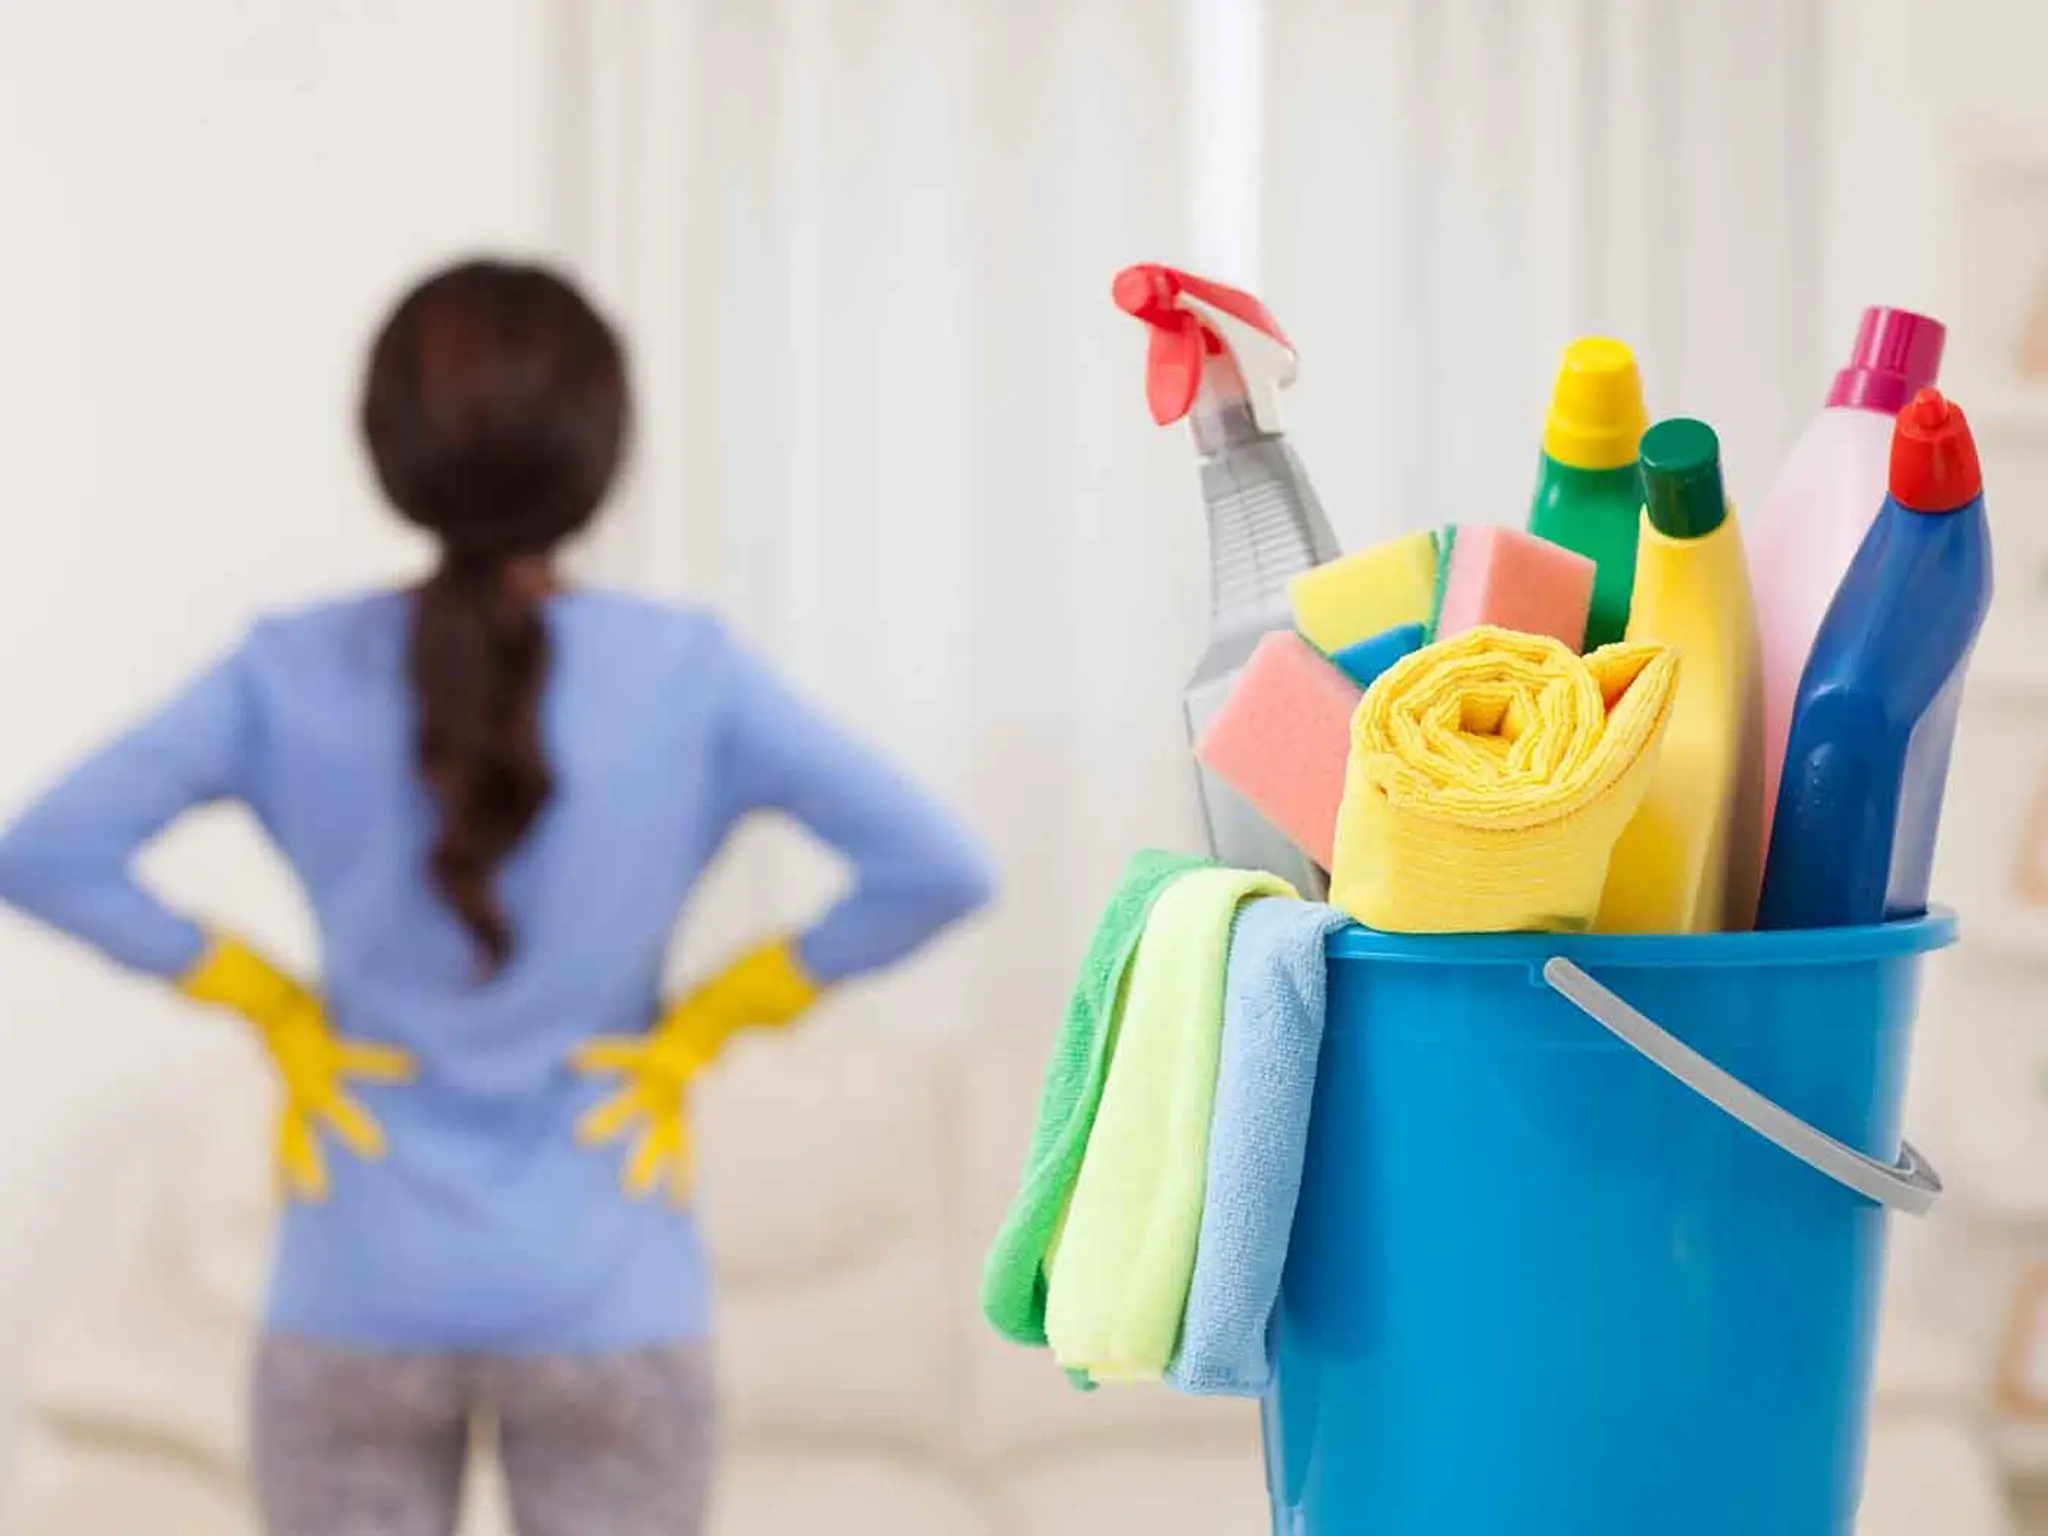 A 50,000-dirham fine on an Emirati facility for recruiting domestic workers